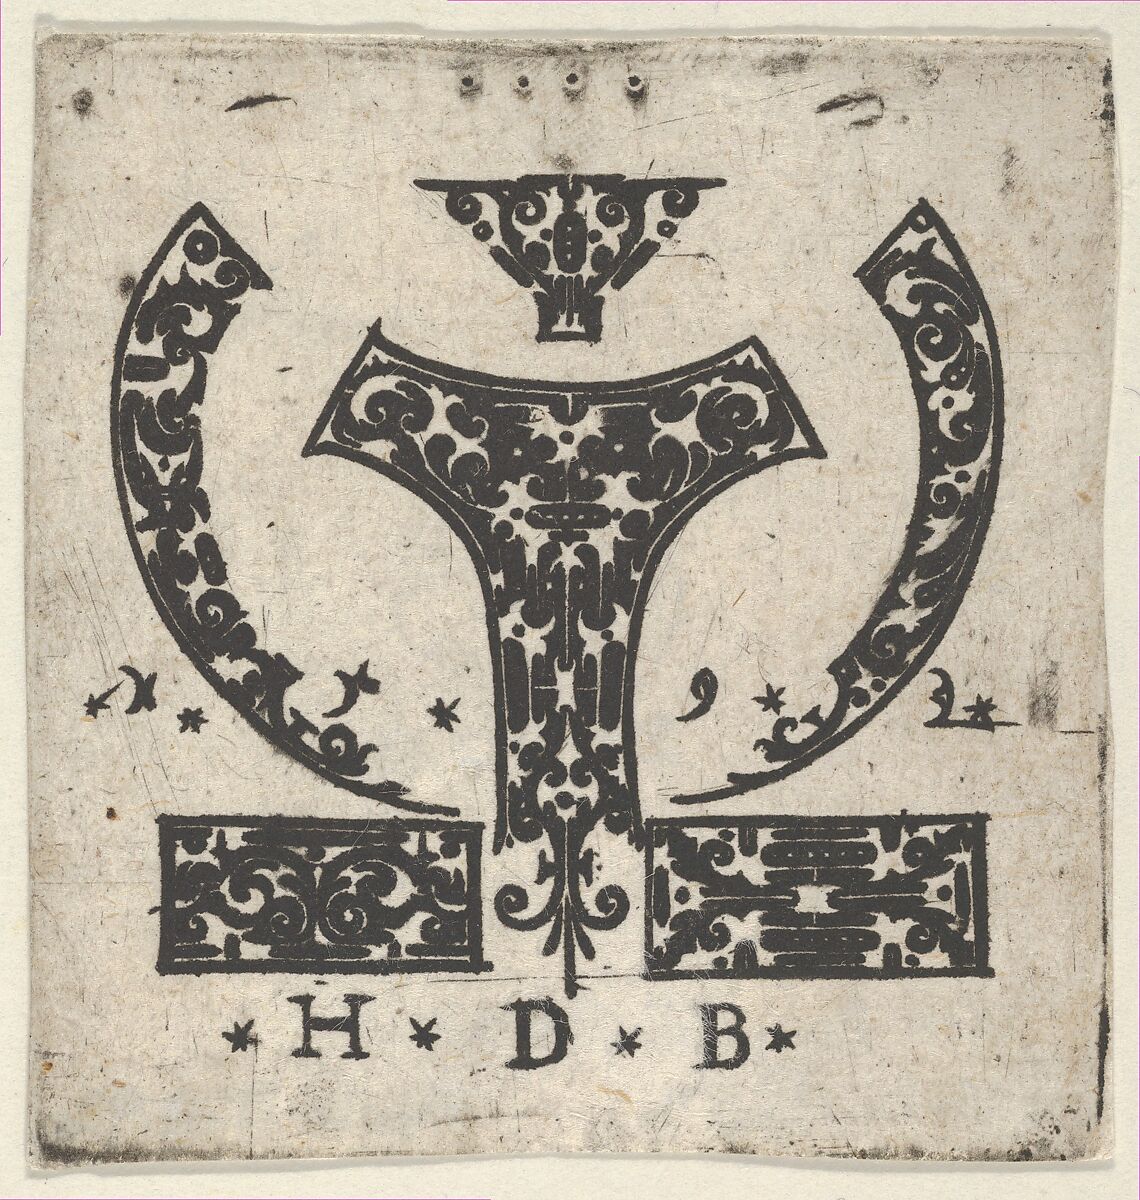 Blackwork Print with Two Horizontal Panels Below a Pair of Lunar-Shaped Fillets with Two Motifs at Center, Hans de Bull (German, active 1592–1604), Blackwork engraving 